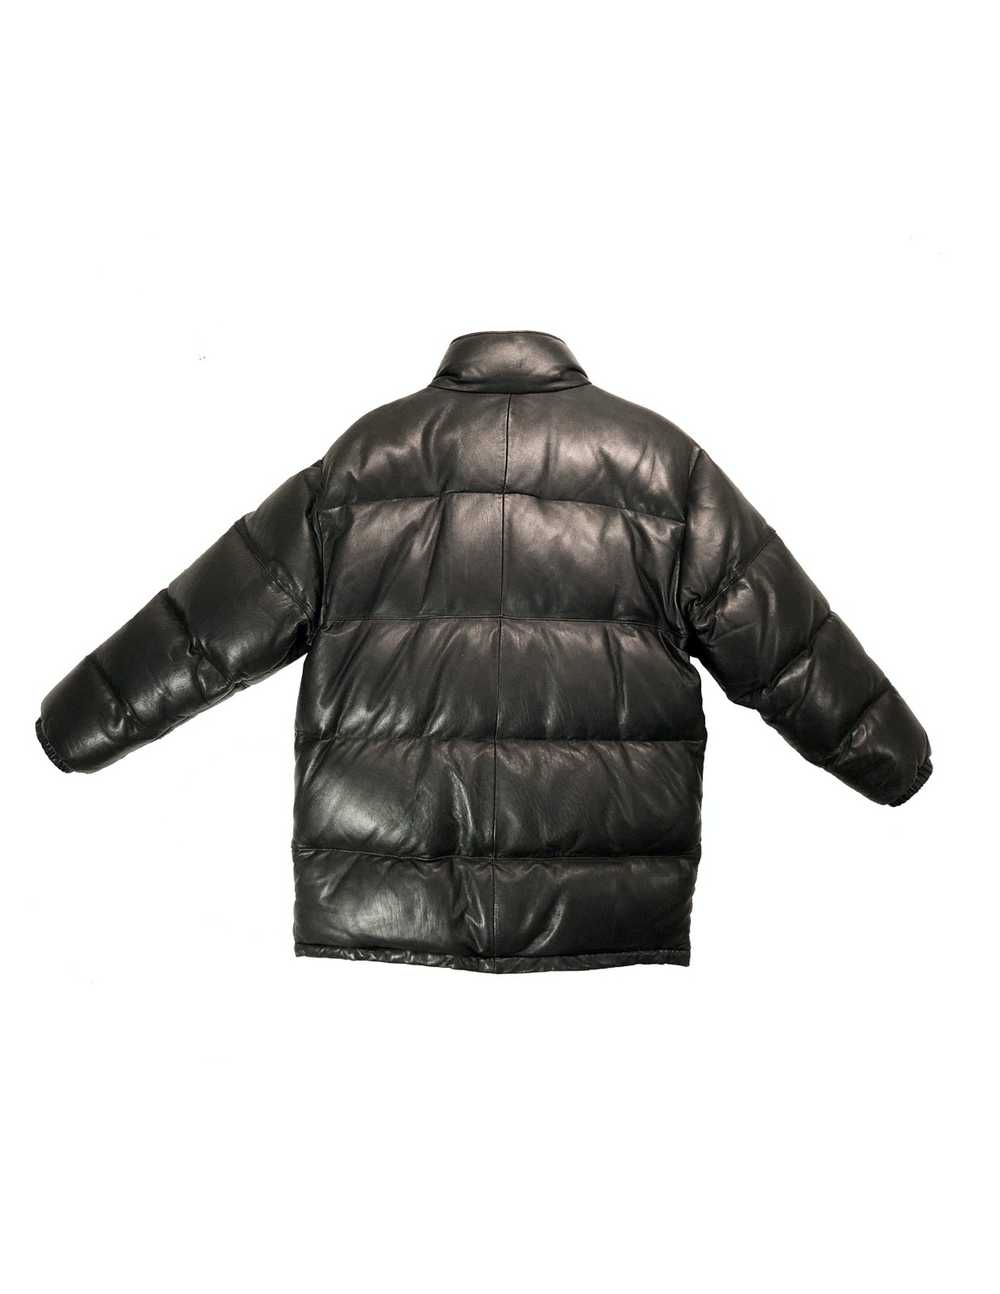 Stussy Archive Stussy Leather Down/Puffer Jacket - image 2